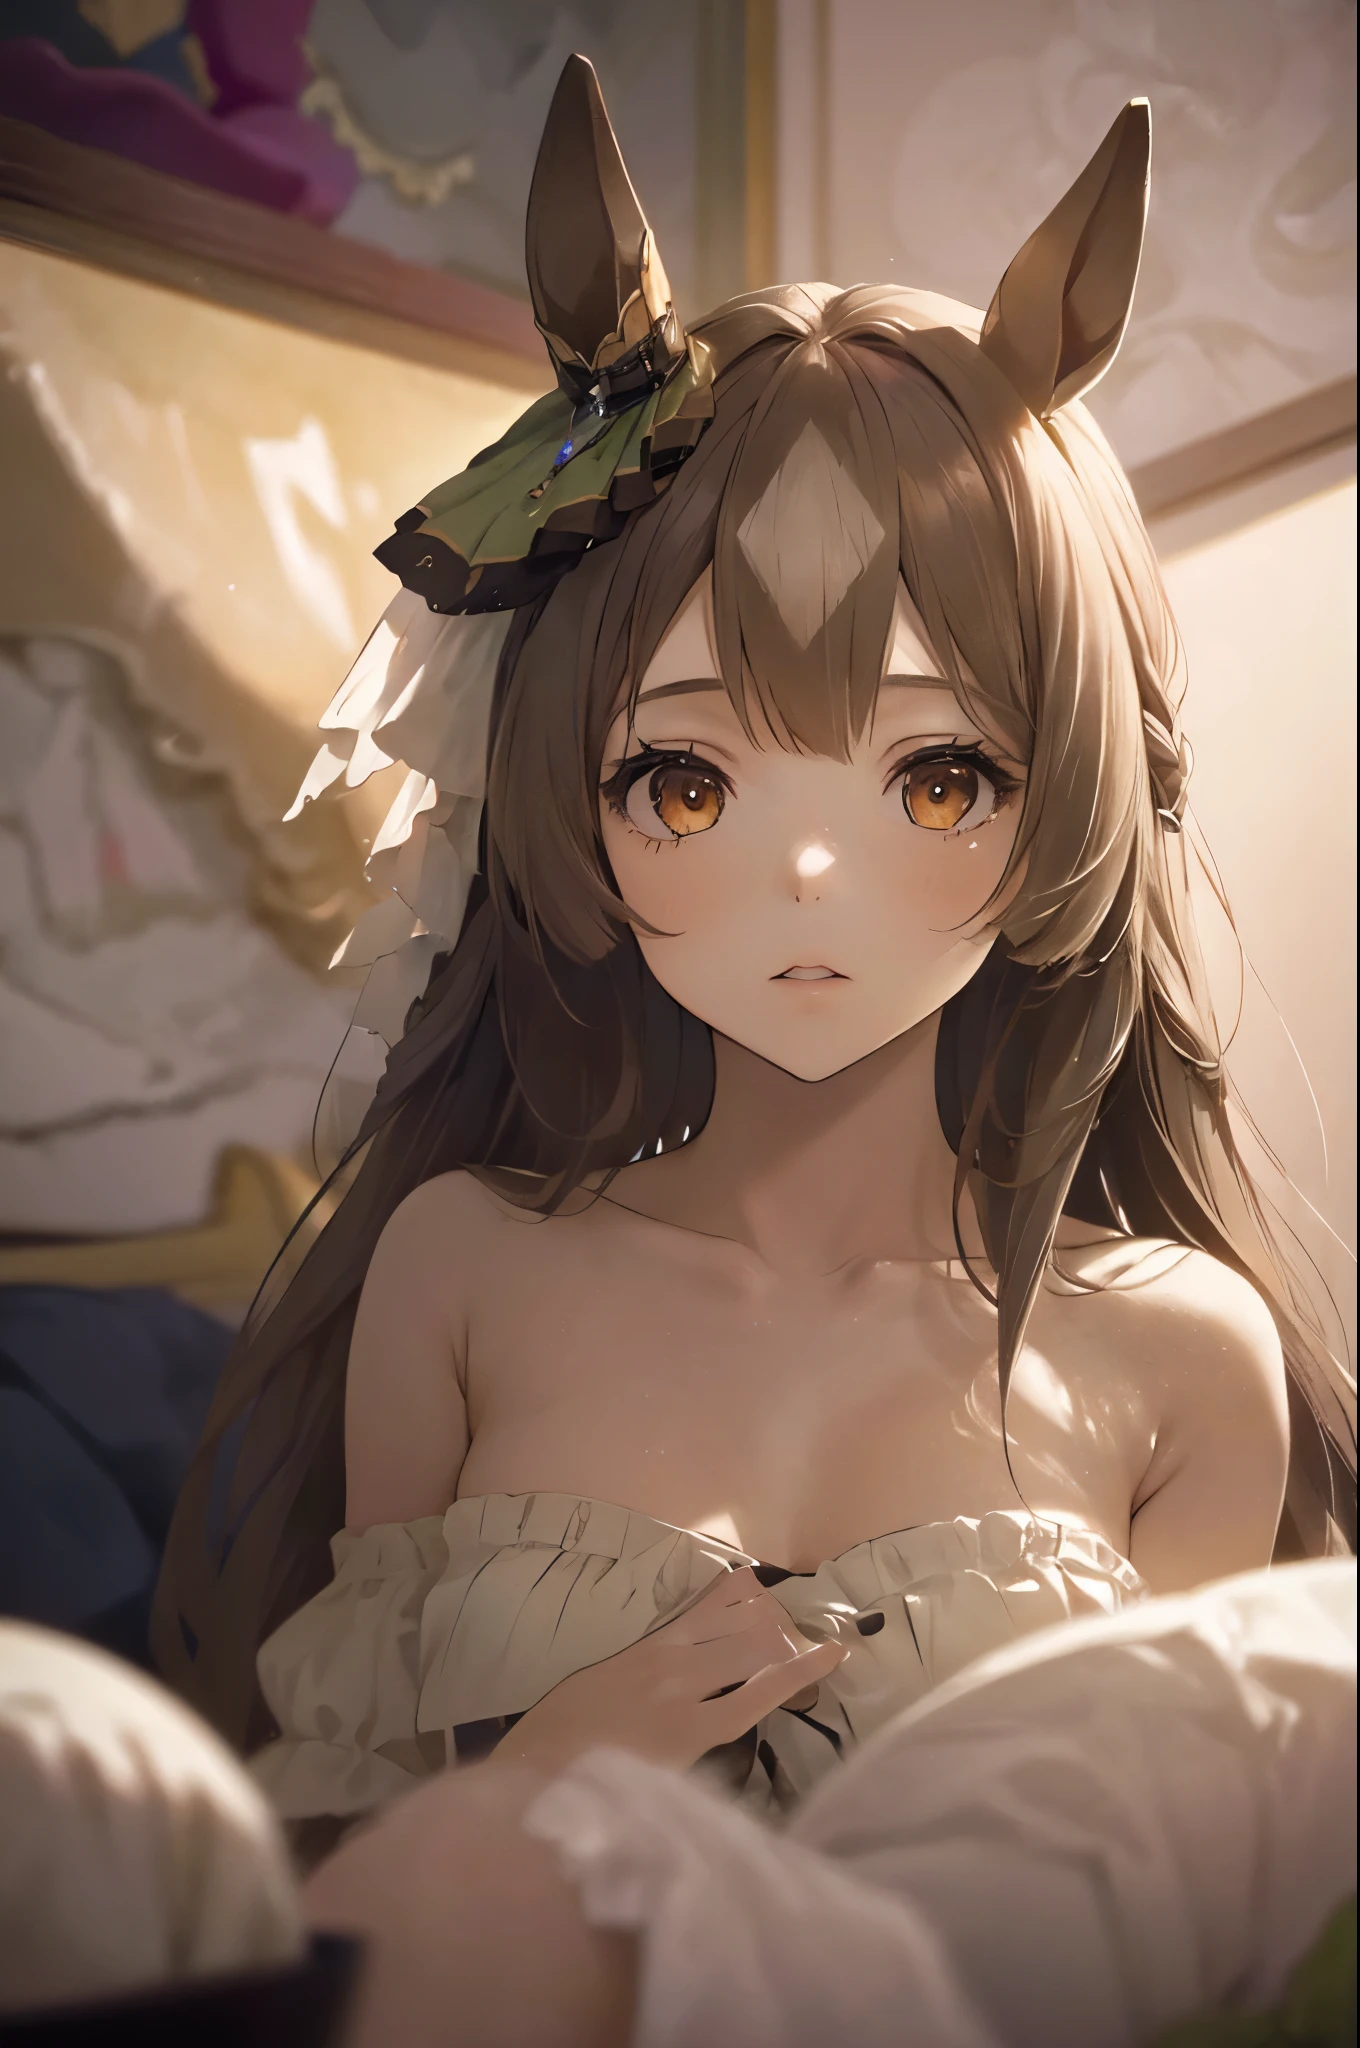 The whole body is visible,satono diamond,umamusume、wearing nothing,((Small Bust)),(highest quality、4k、8k、High Resolution、masterpiece:1.2)、Super detailed、(Photorealistic:1.37)、Portrait、Sharp Focus、feminine、delicate、White skin、Subtle curves、Gentle expression、Soft lighting、Bright colors、Artistic atmosphere